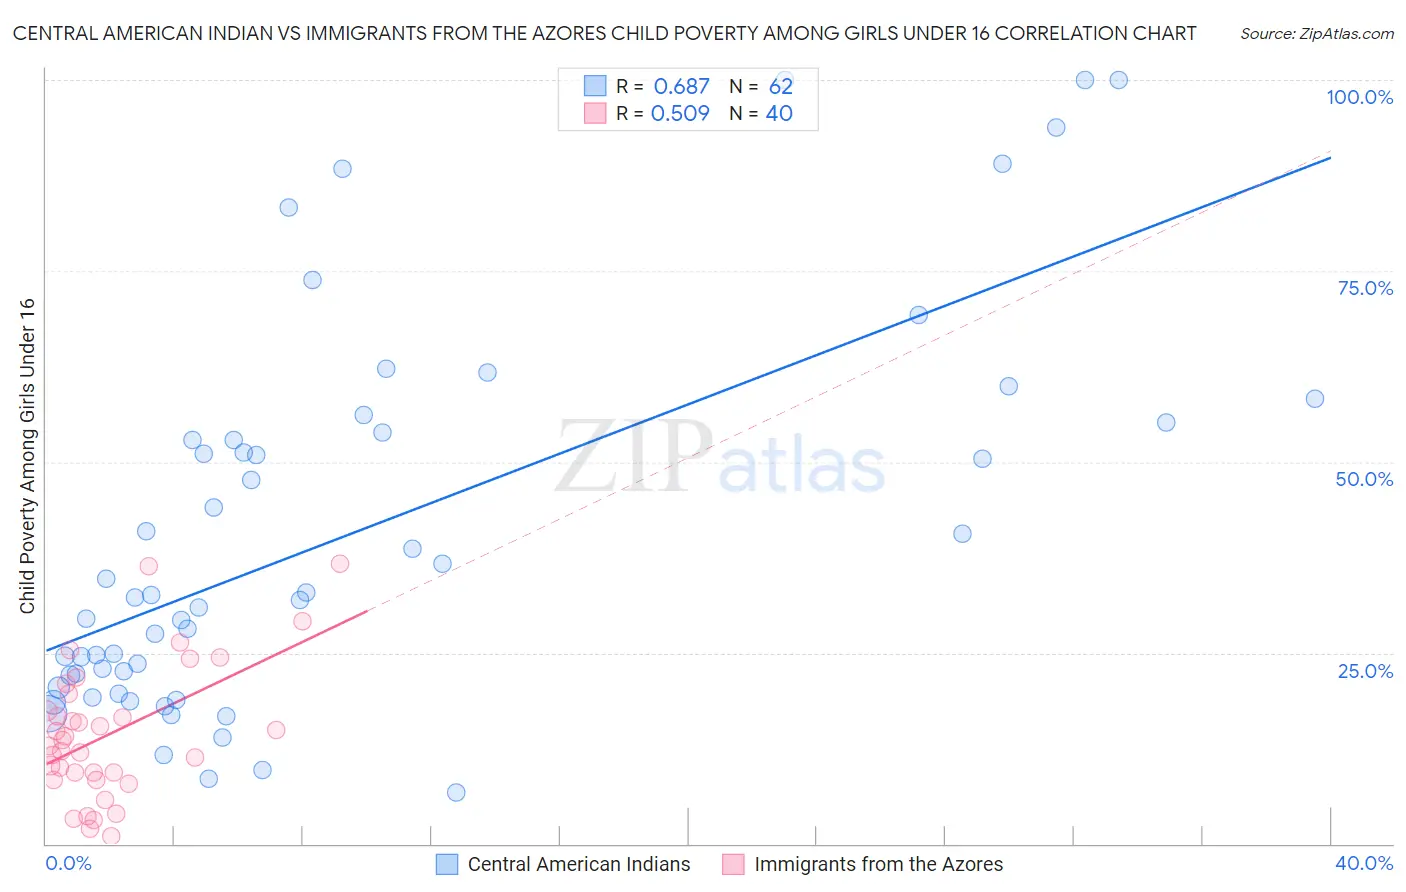 Central American Indian vs Immigrants from the Azores Child Poverty Among Girls Under 16